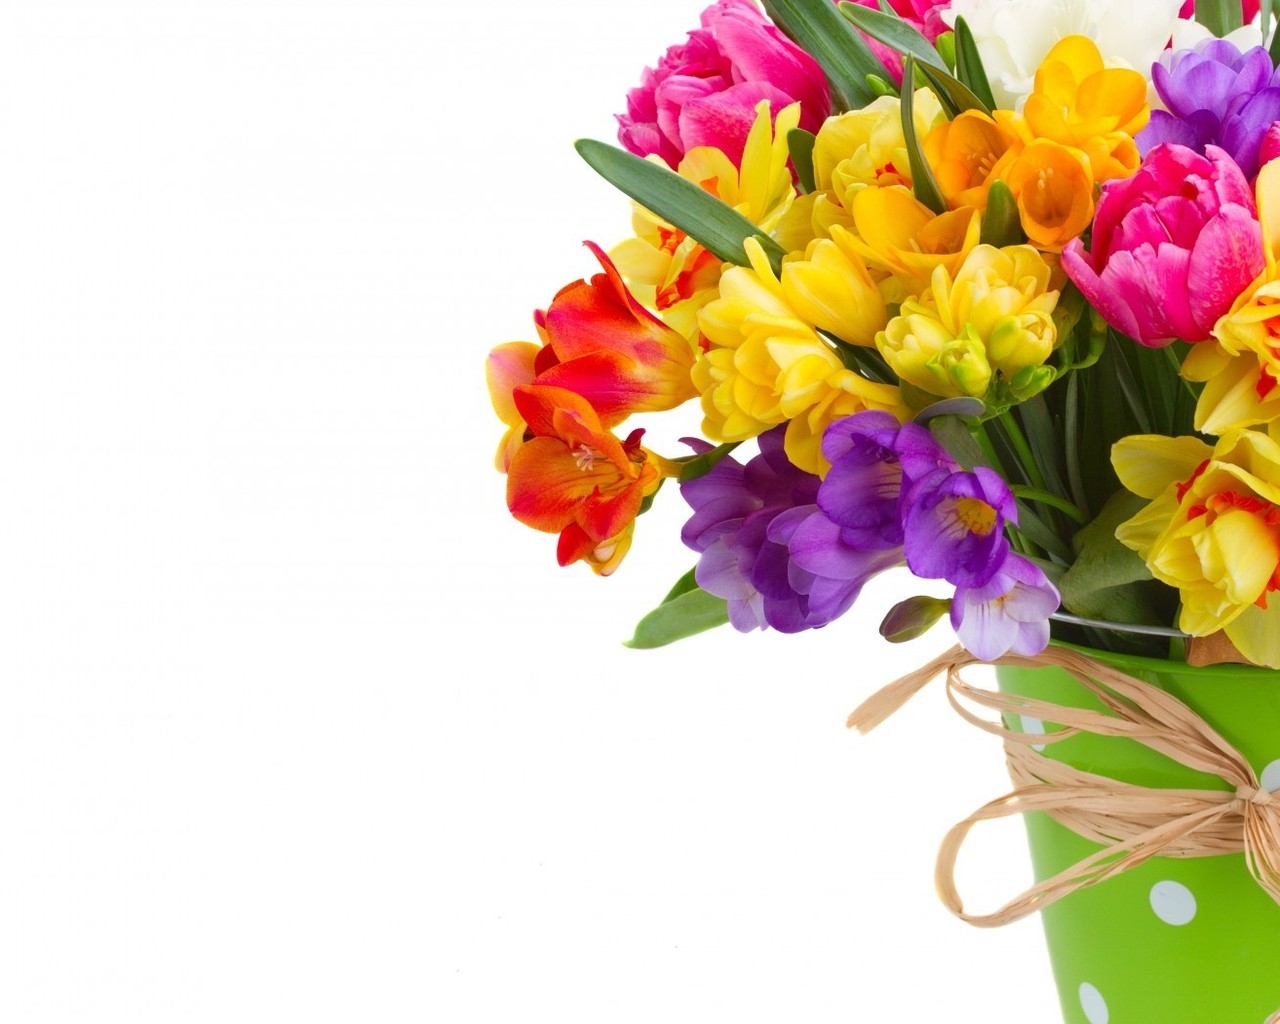 Daffodils and Freesias Bouquet for 1280 x 1024 resolution